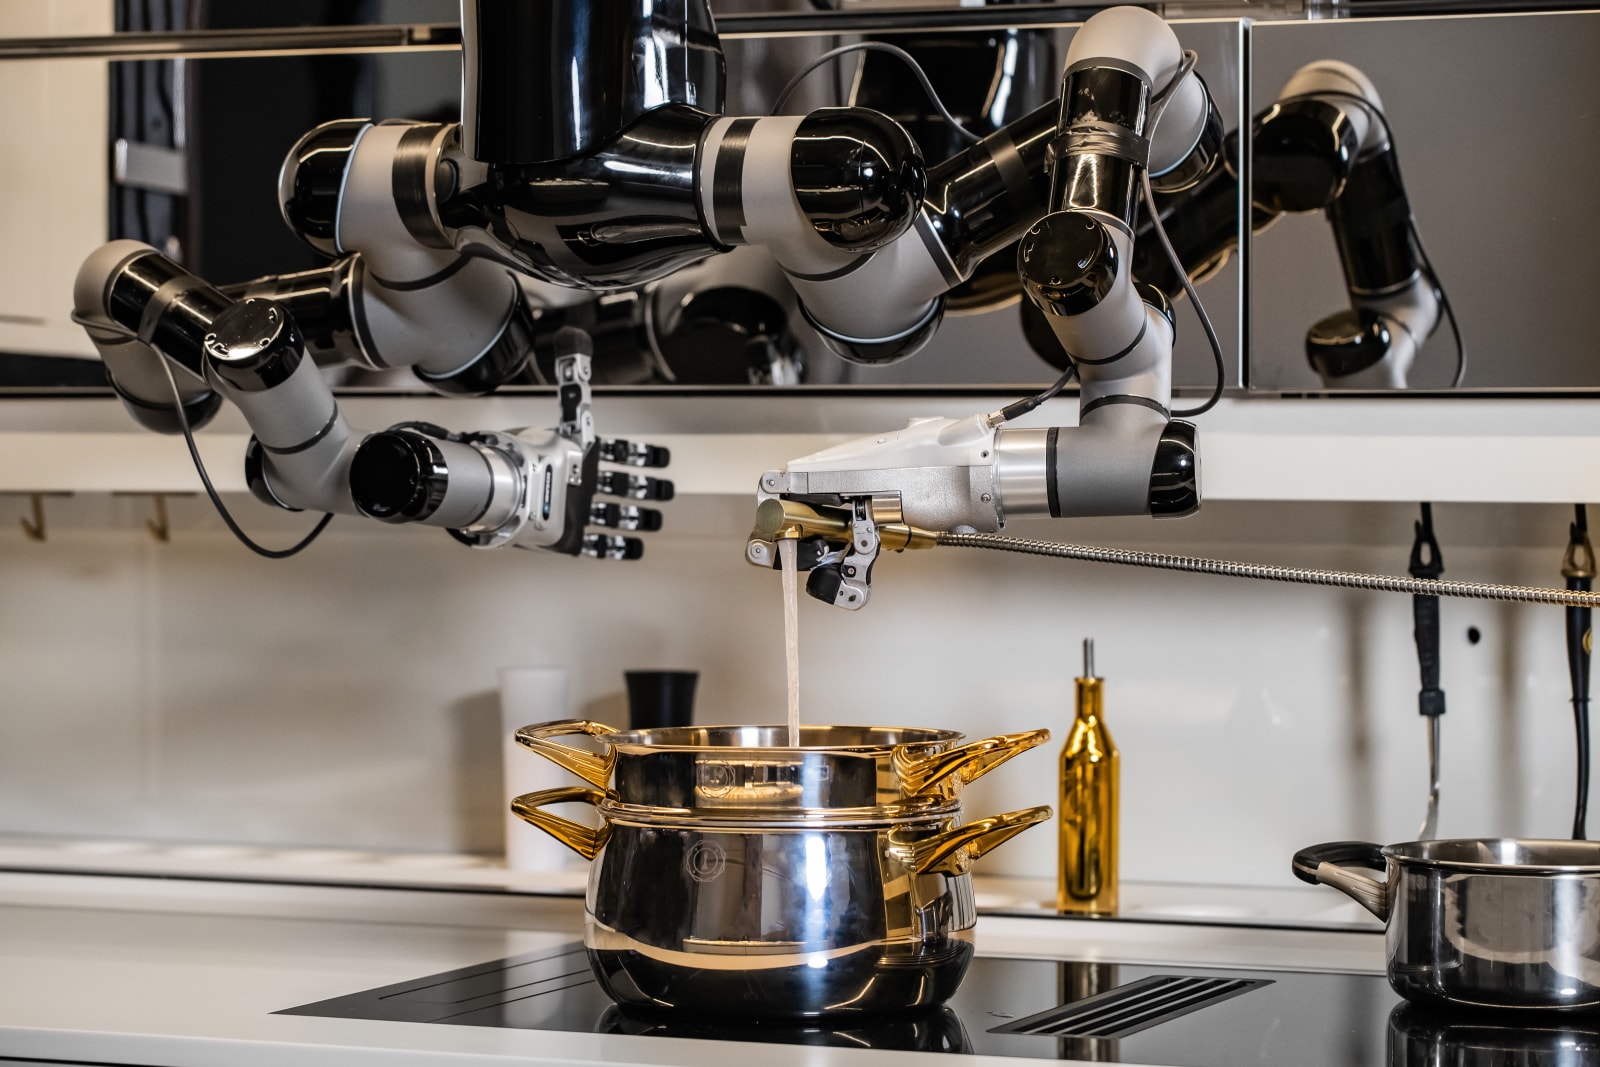 https://s1.cdn.autoevolution.com/images/news/the-robots-are-taking-over-moley-unveils-worlds-first-robotic-kitchen-154390_1.jpg